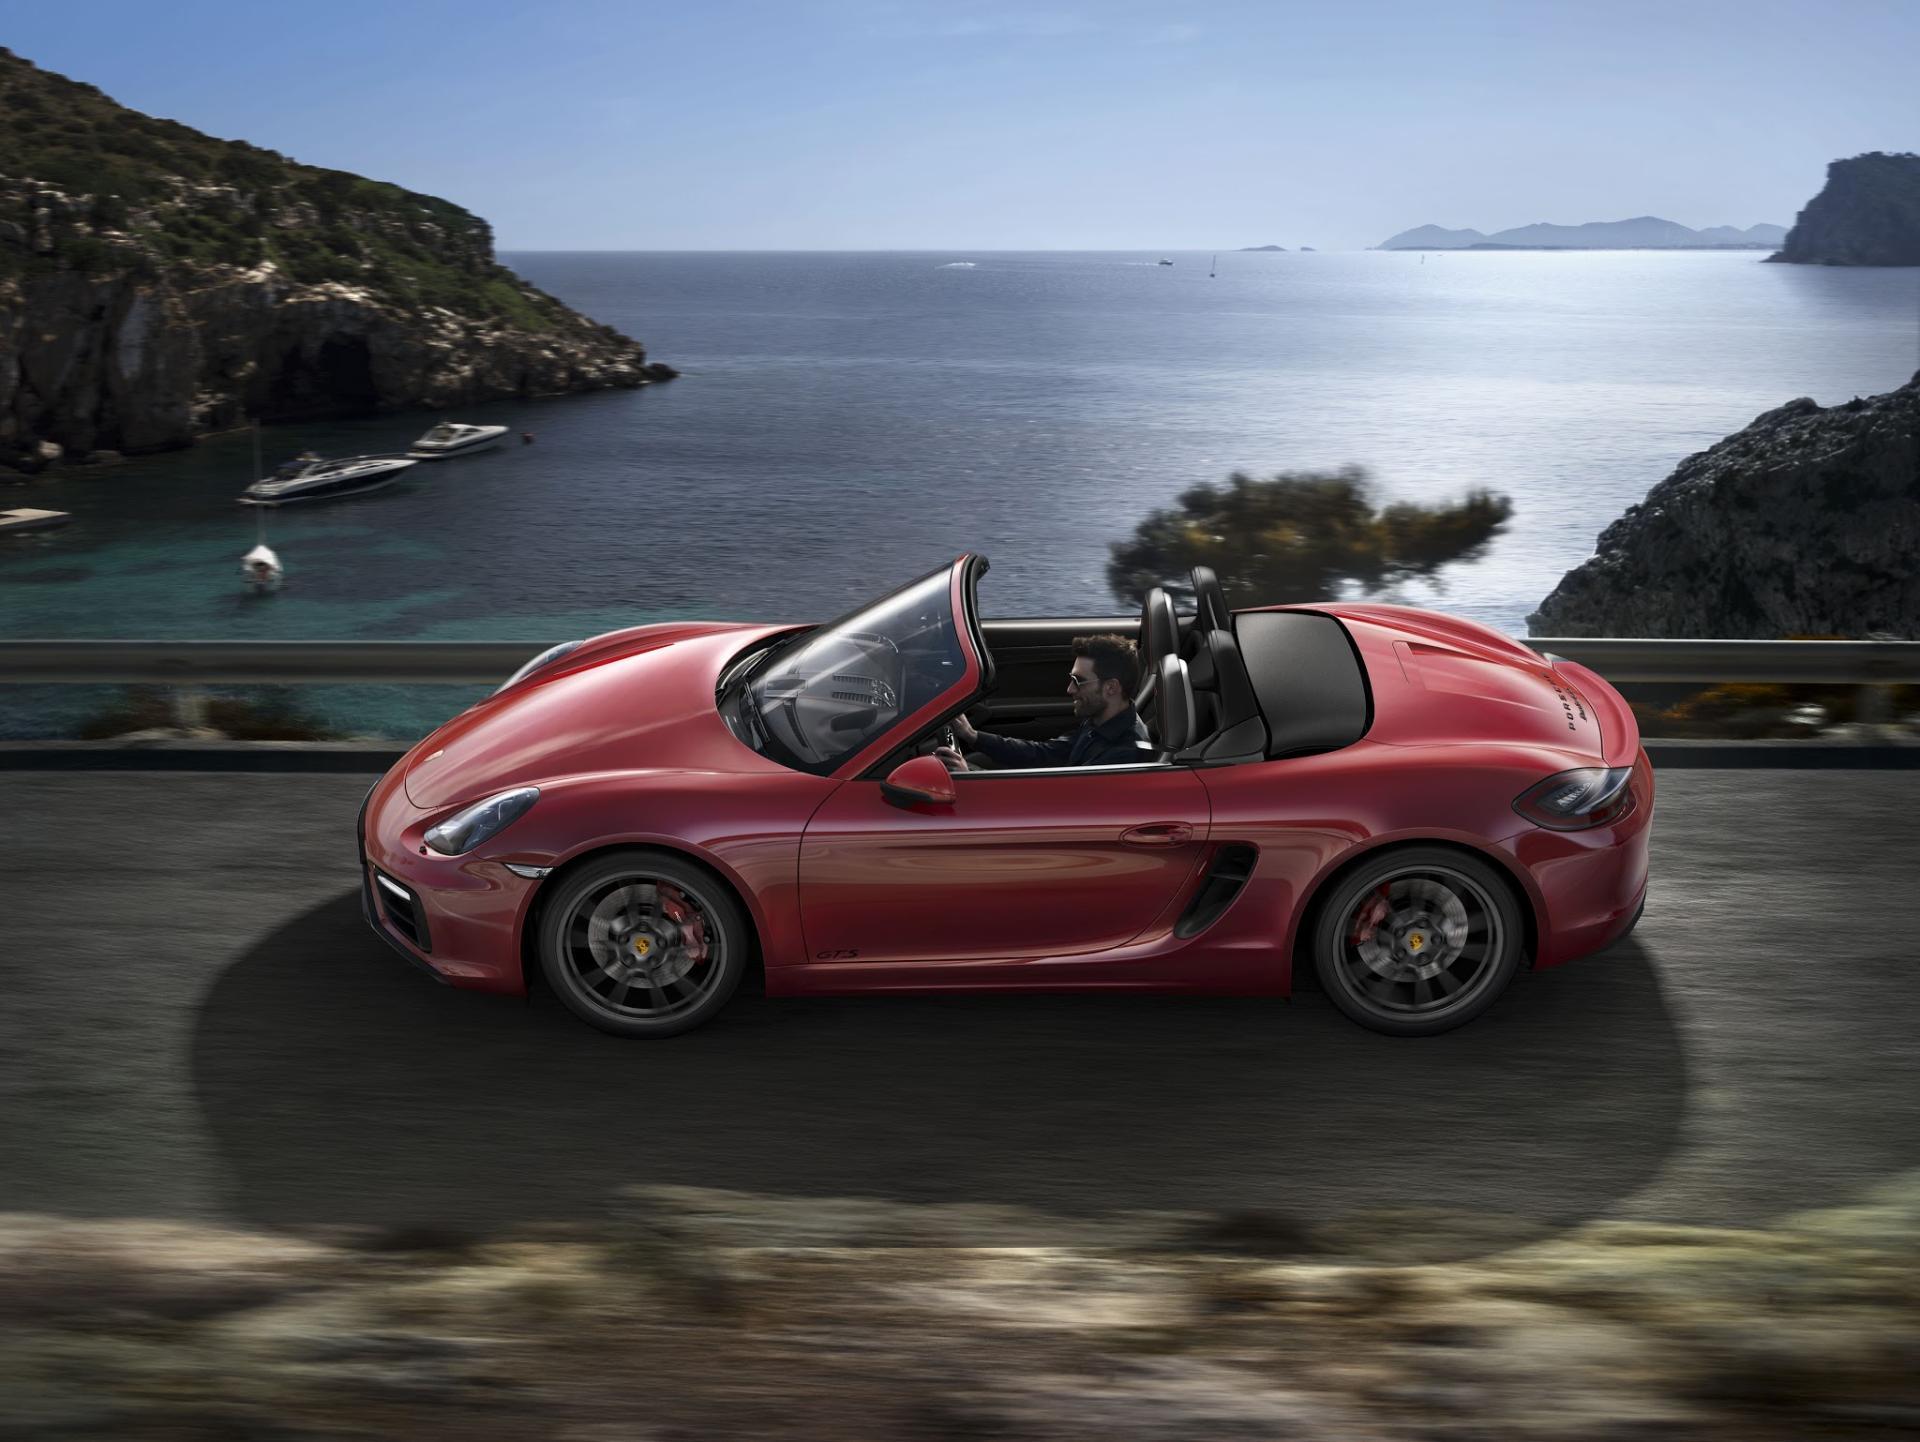 Porsche Boxster GTS Wallpaper and Image Gallery